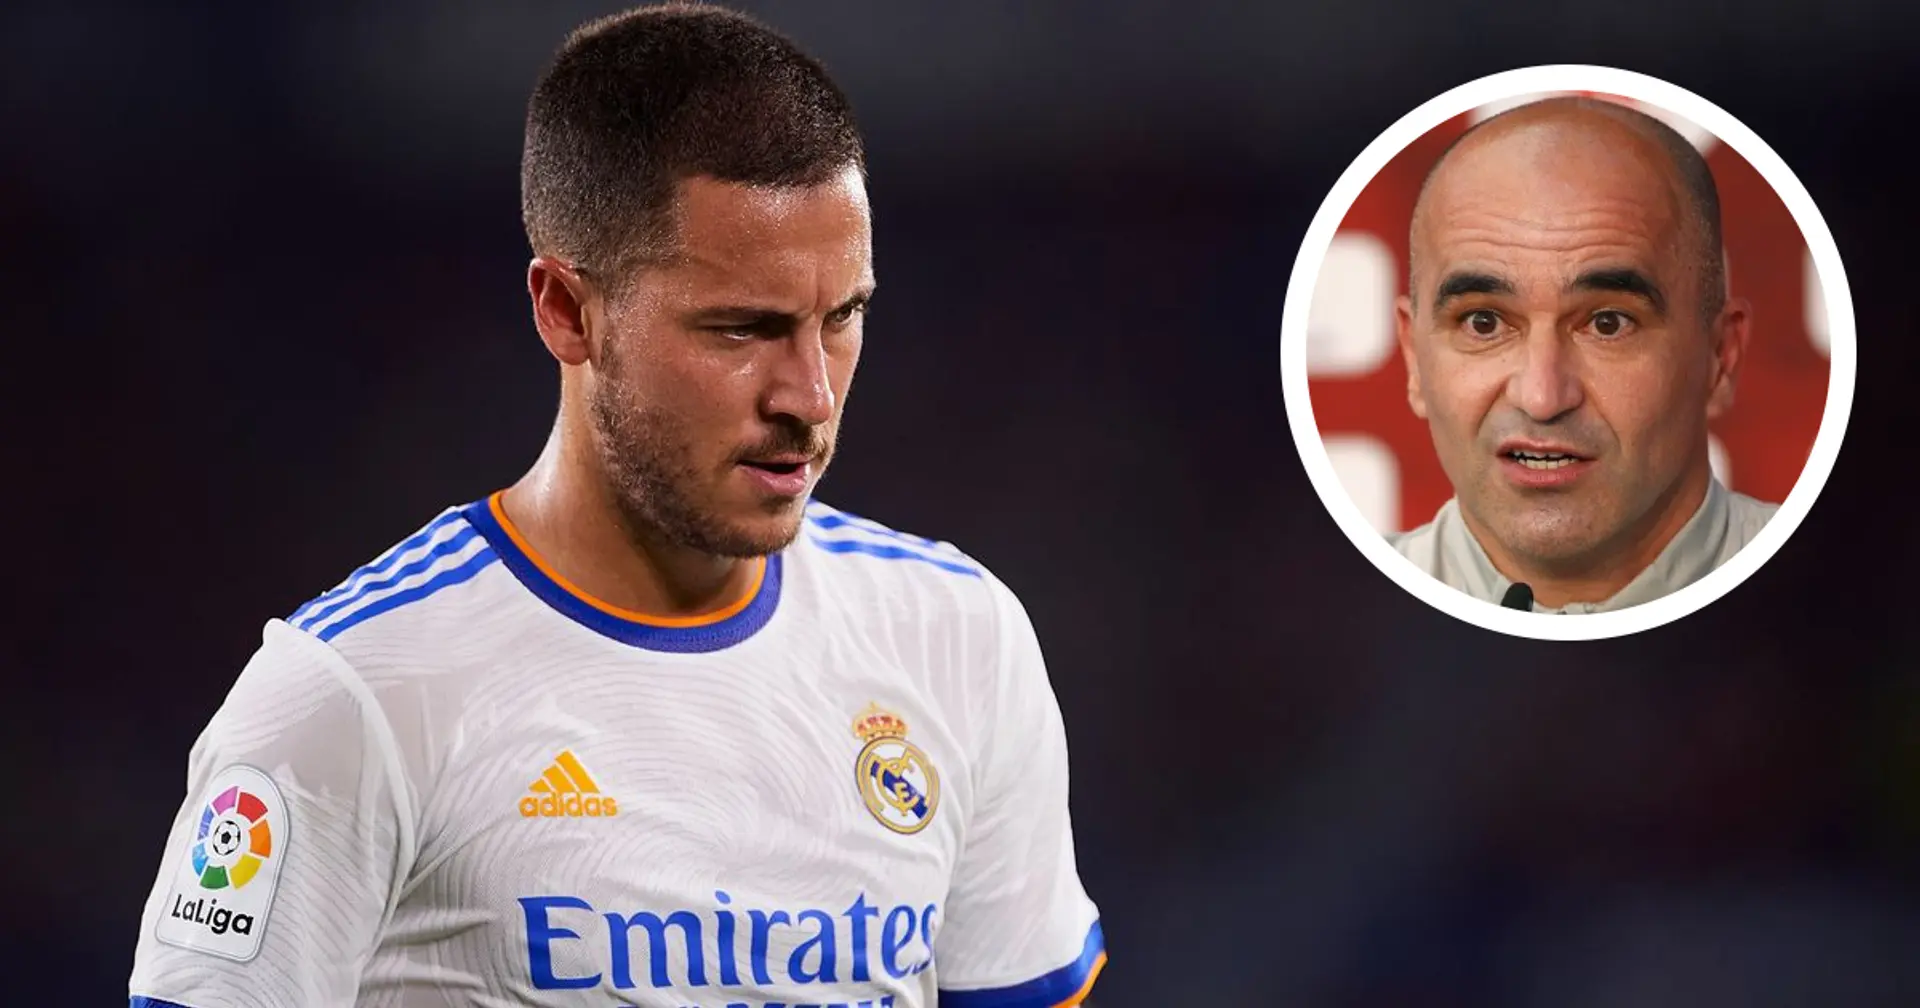 Roberto Martinez: 'Hazard's situation in Madrid has become even more desperate, let's be honest'